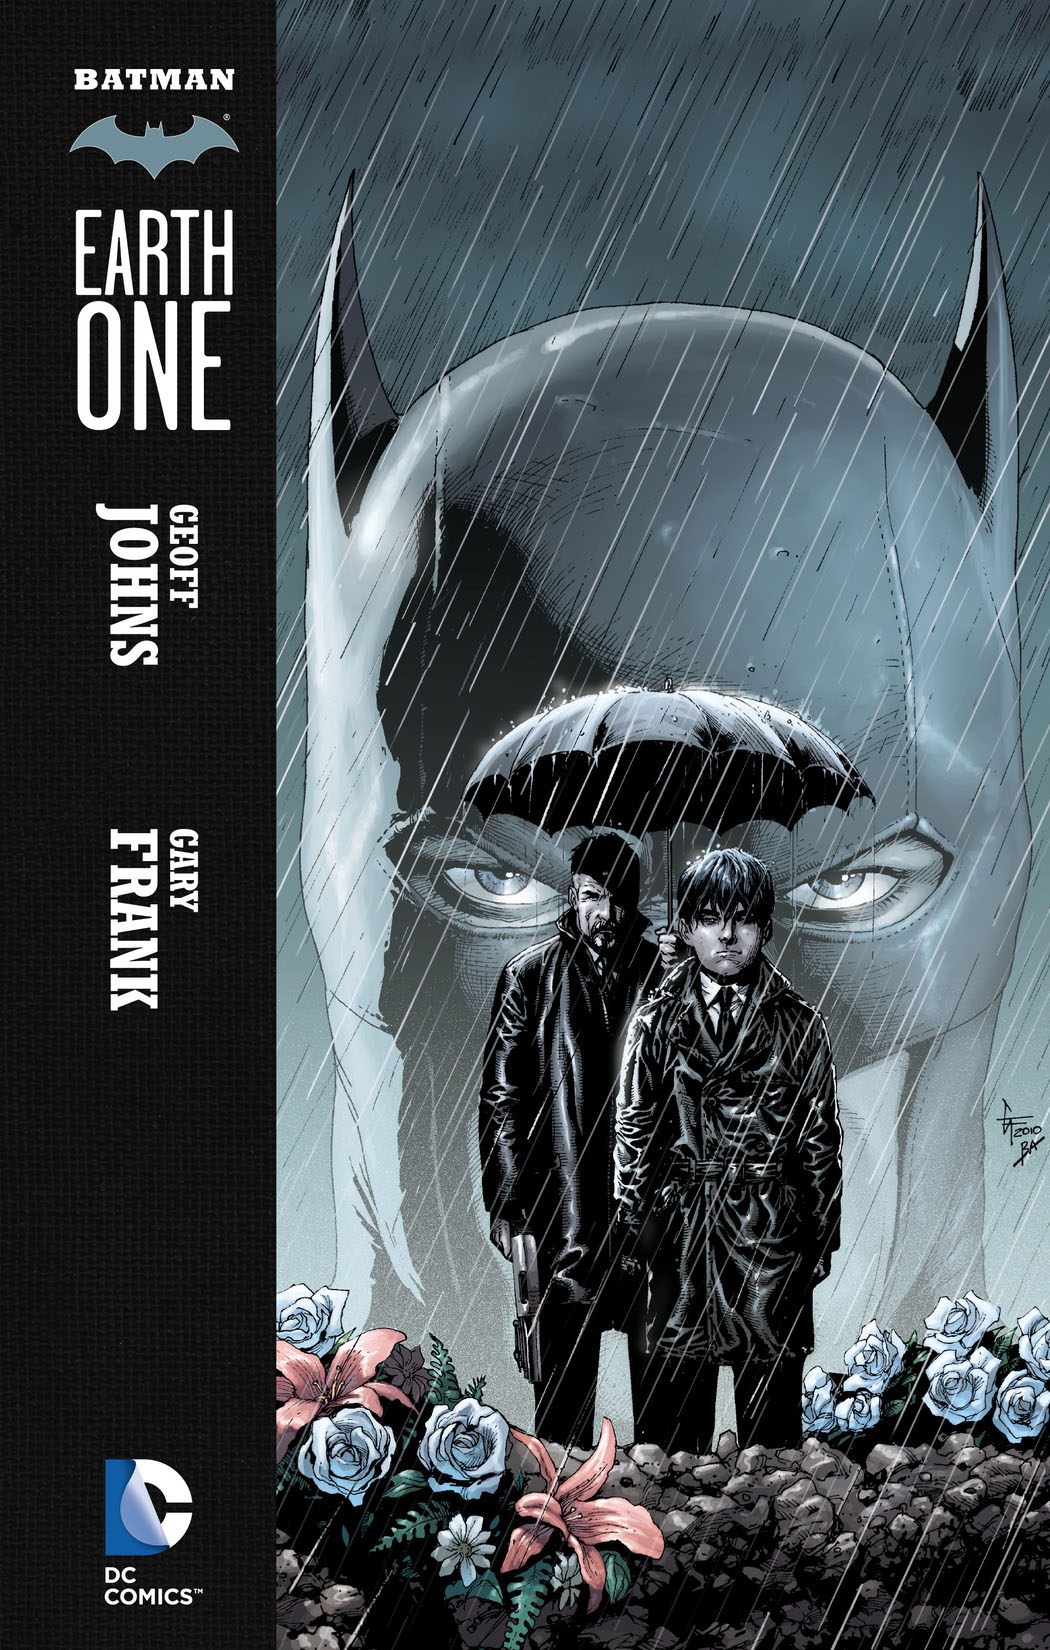 Batman: Earth One preview images